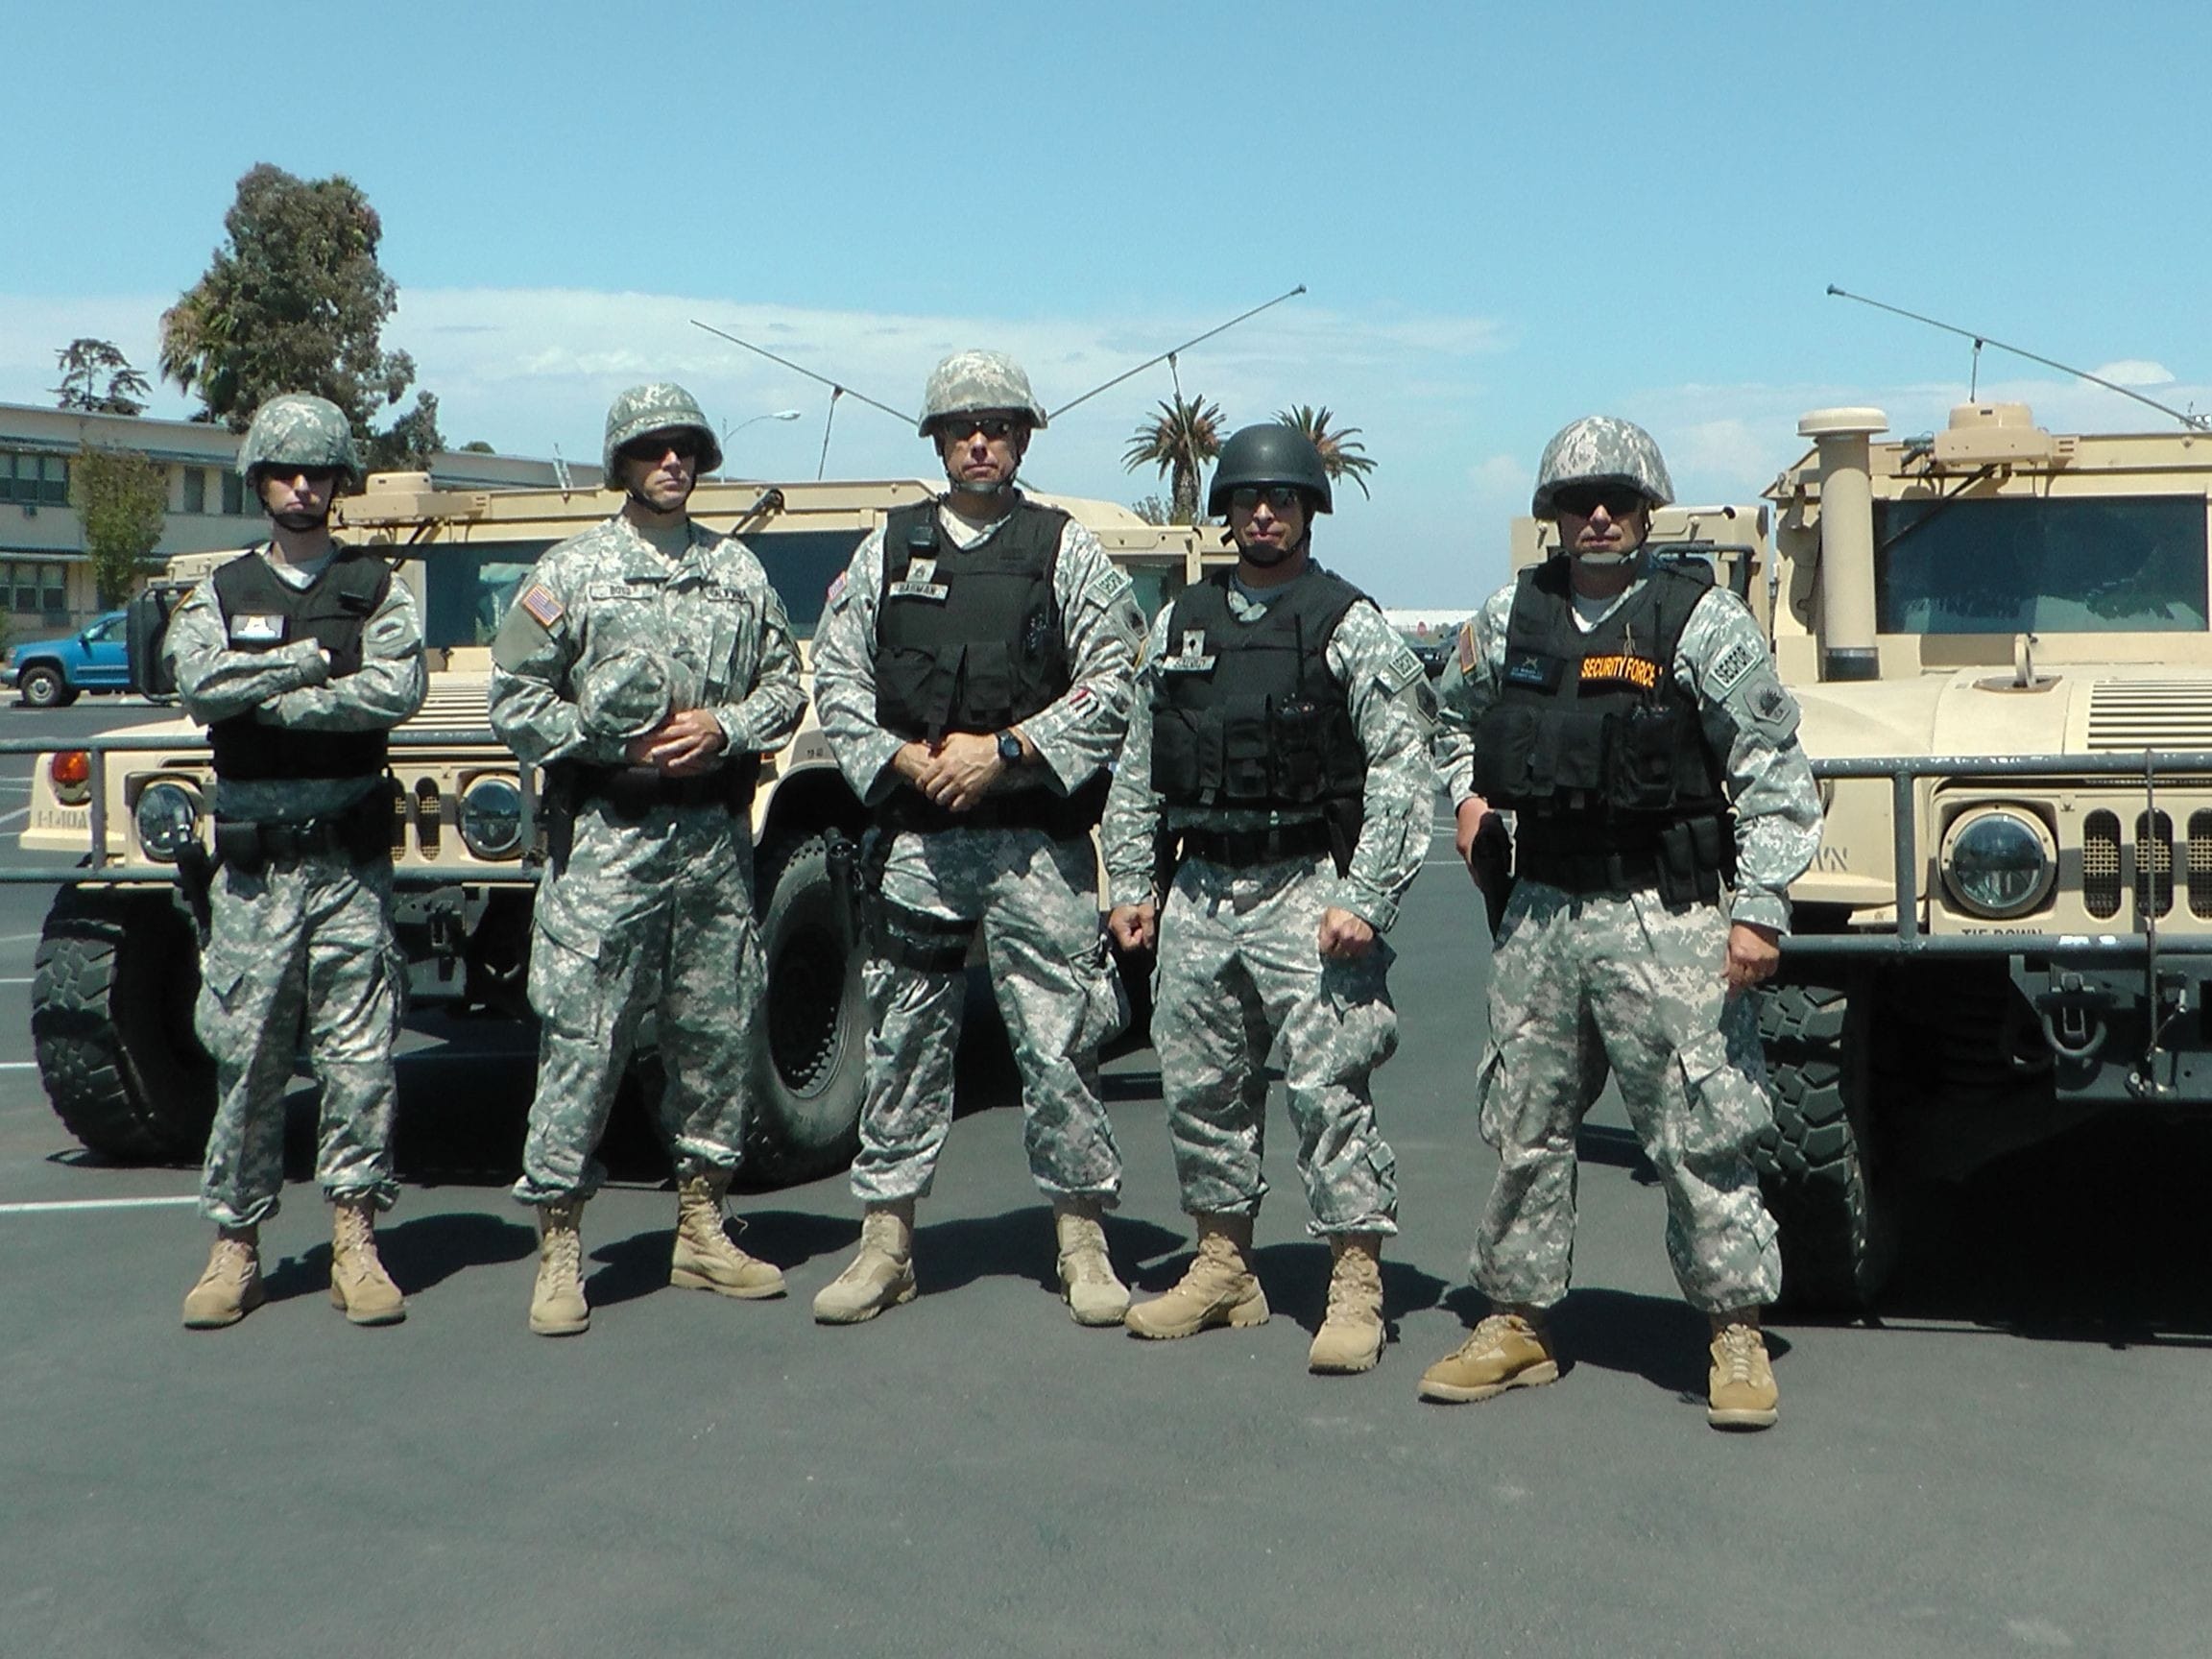 Sergeant First Class Wagner (far right) with a few of his SRT soldiers standing in front of two armored Humvees.